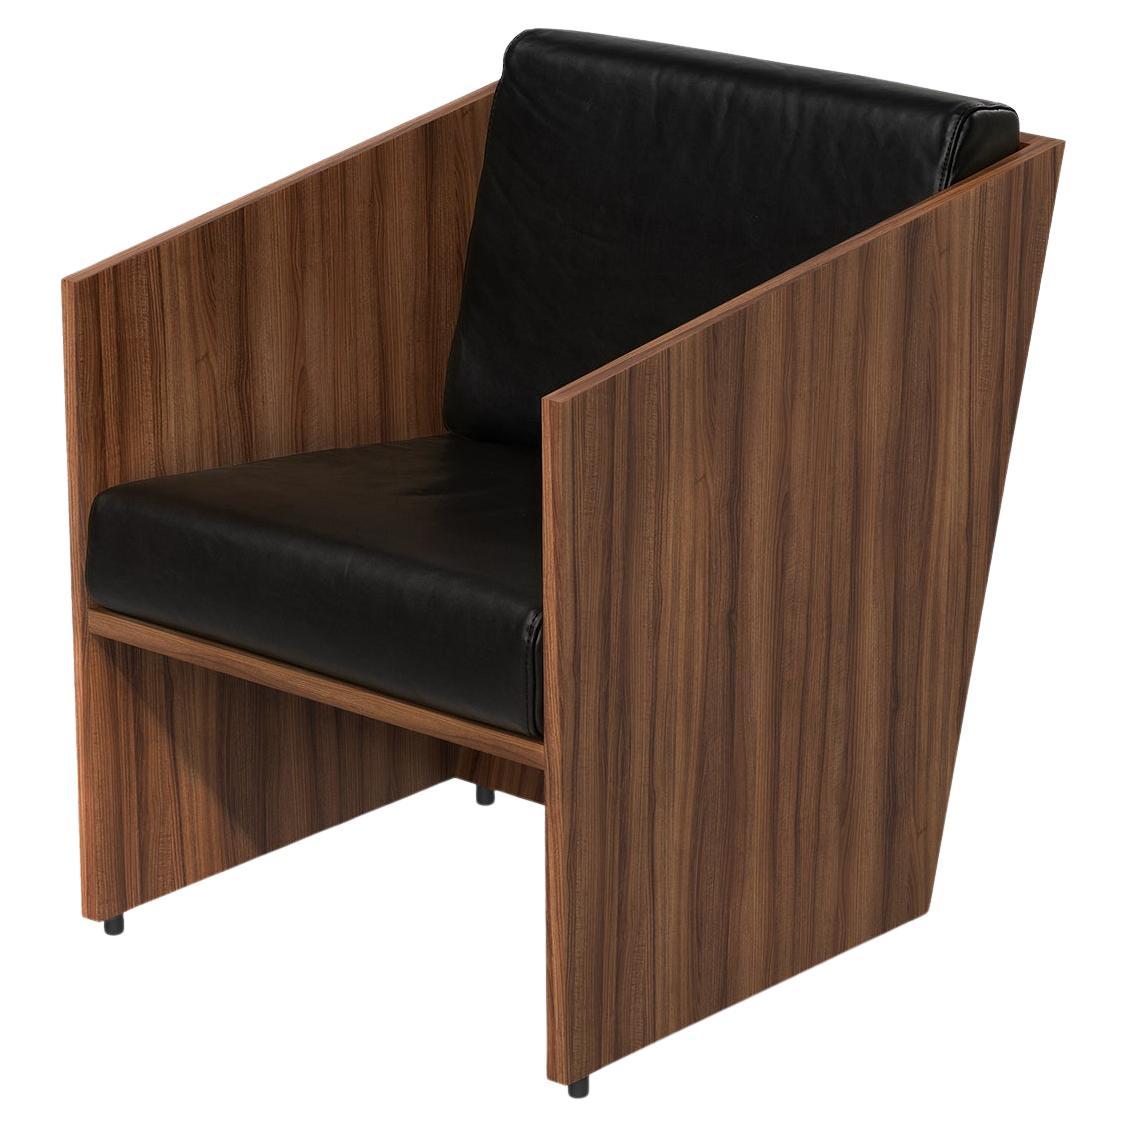 Minimalist Timeless Armchair in Walnut Wood and Black Leather